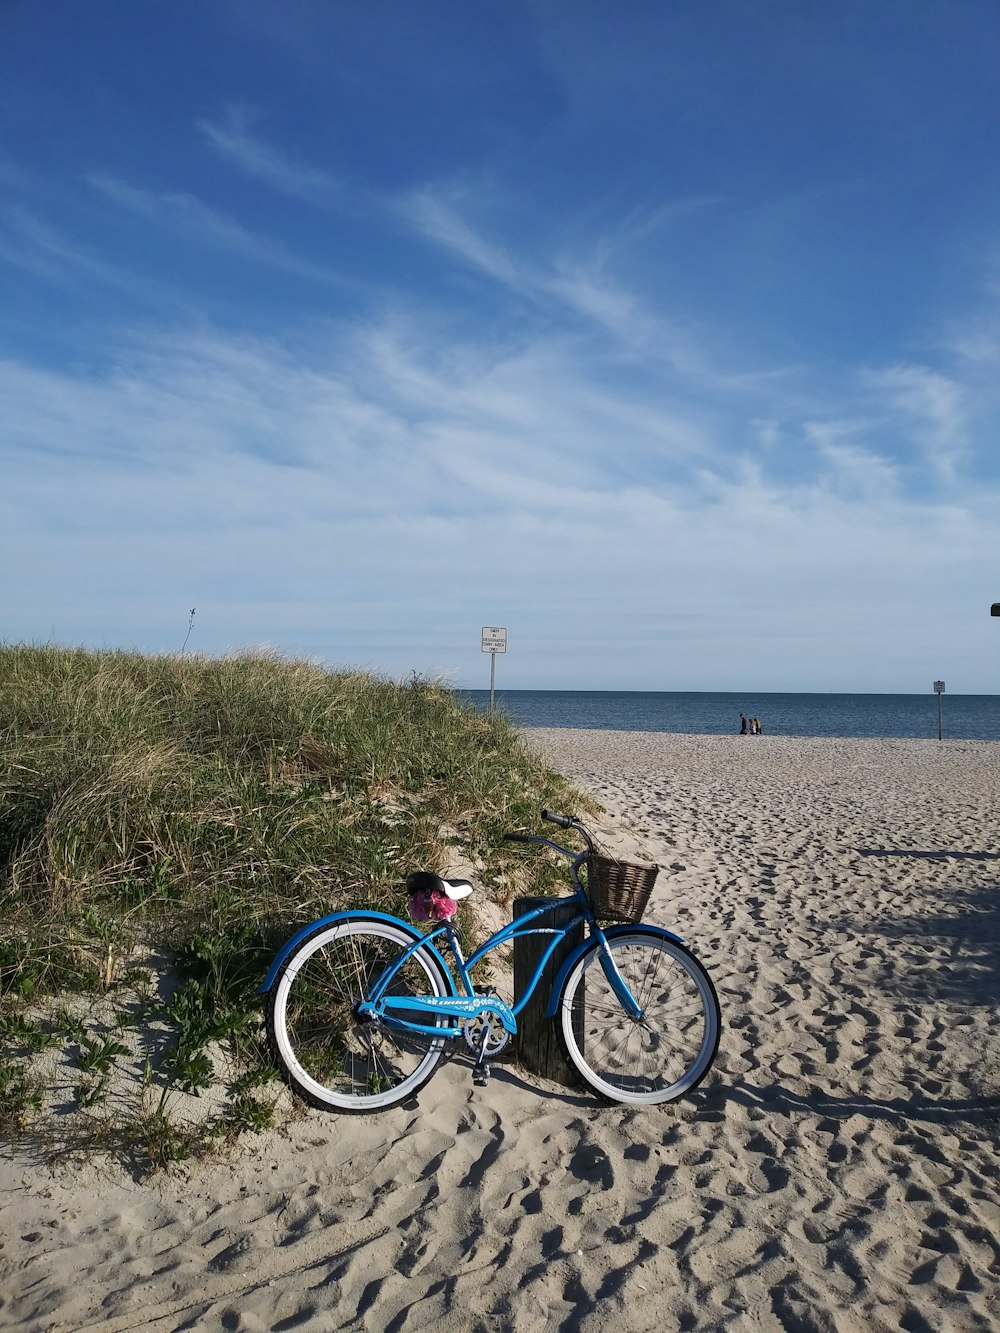 blue and black bicycle on beach during daytime